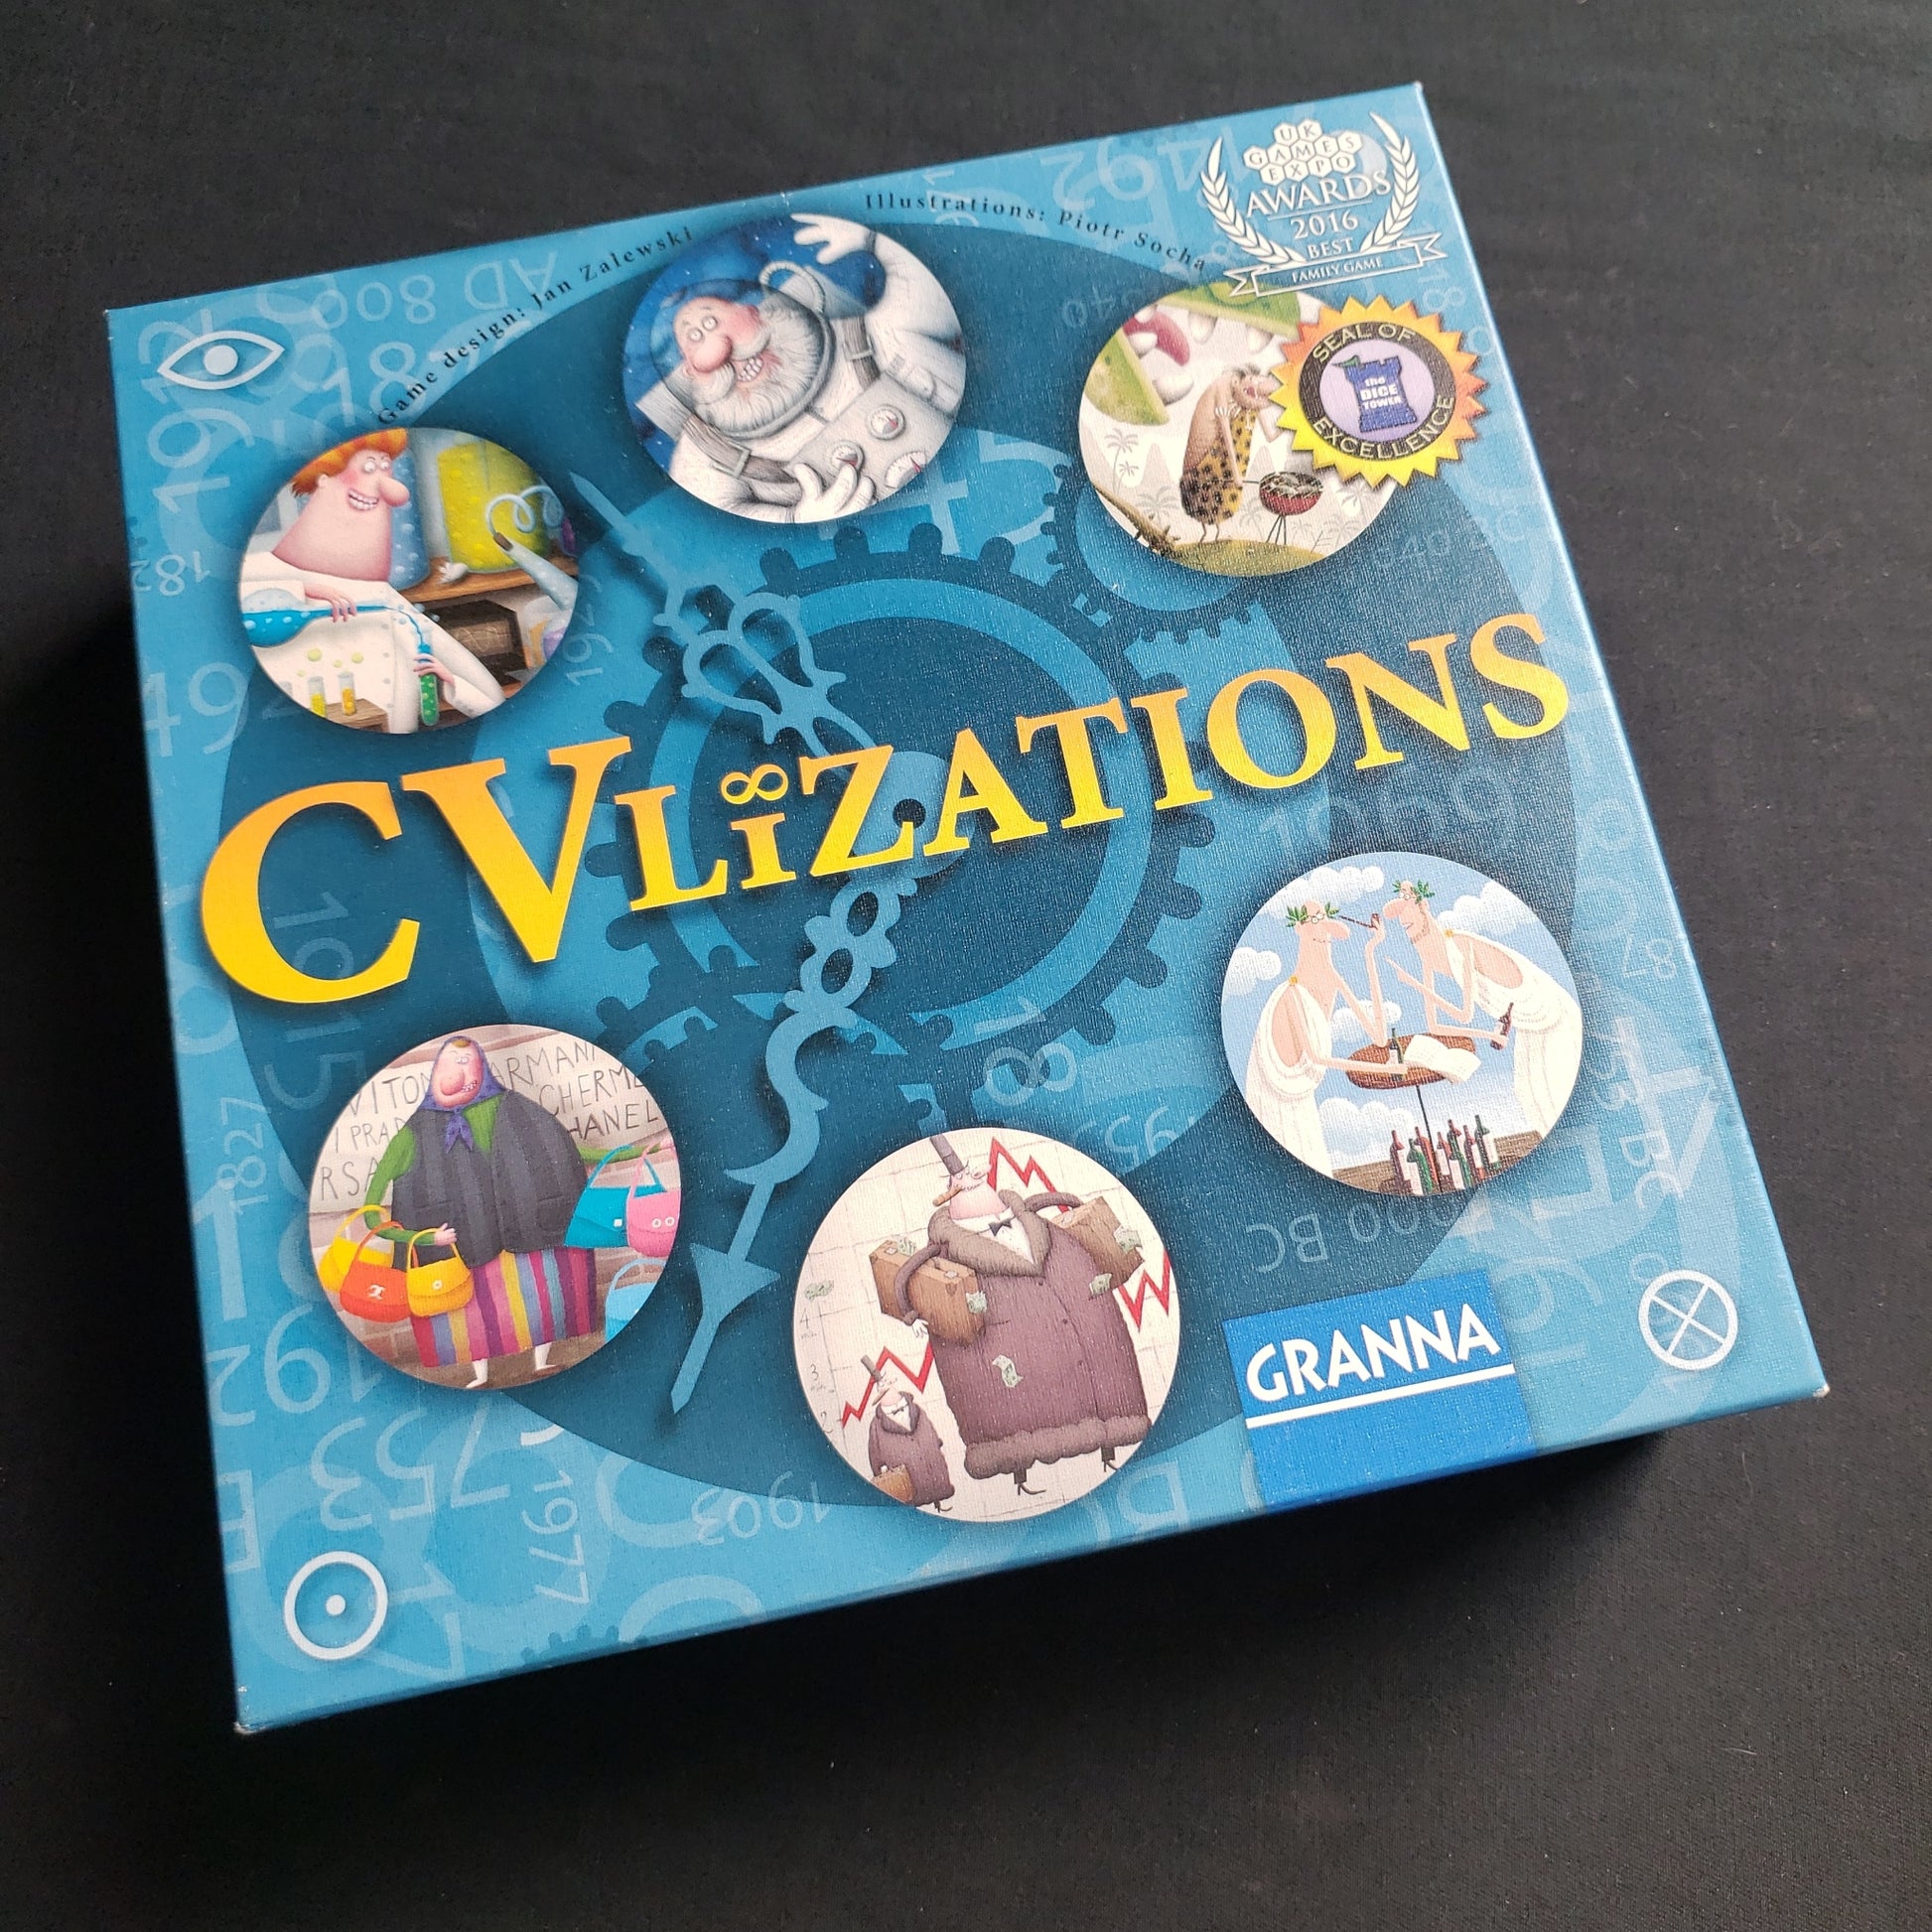 Image shows the front cover of the box of the CVlizations board game